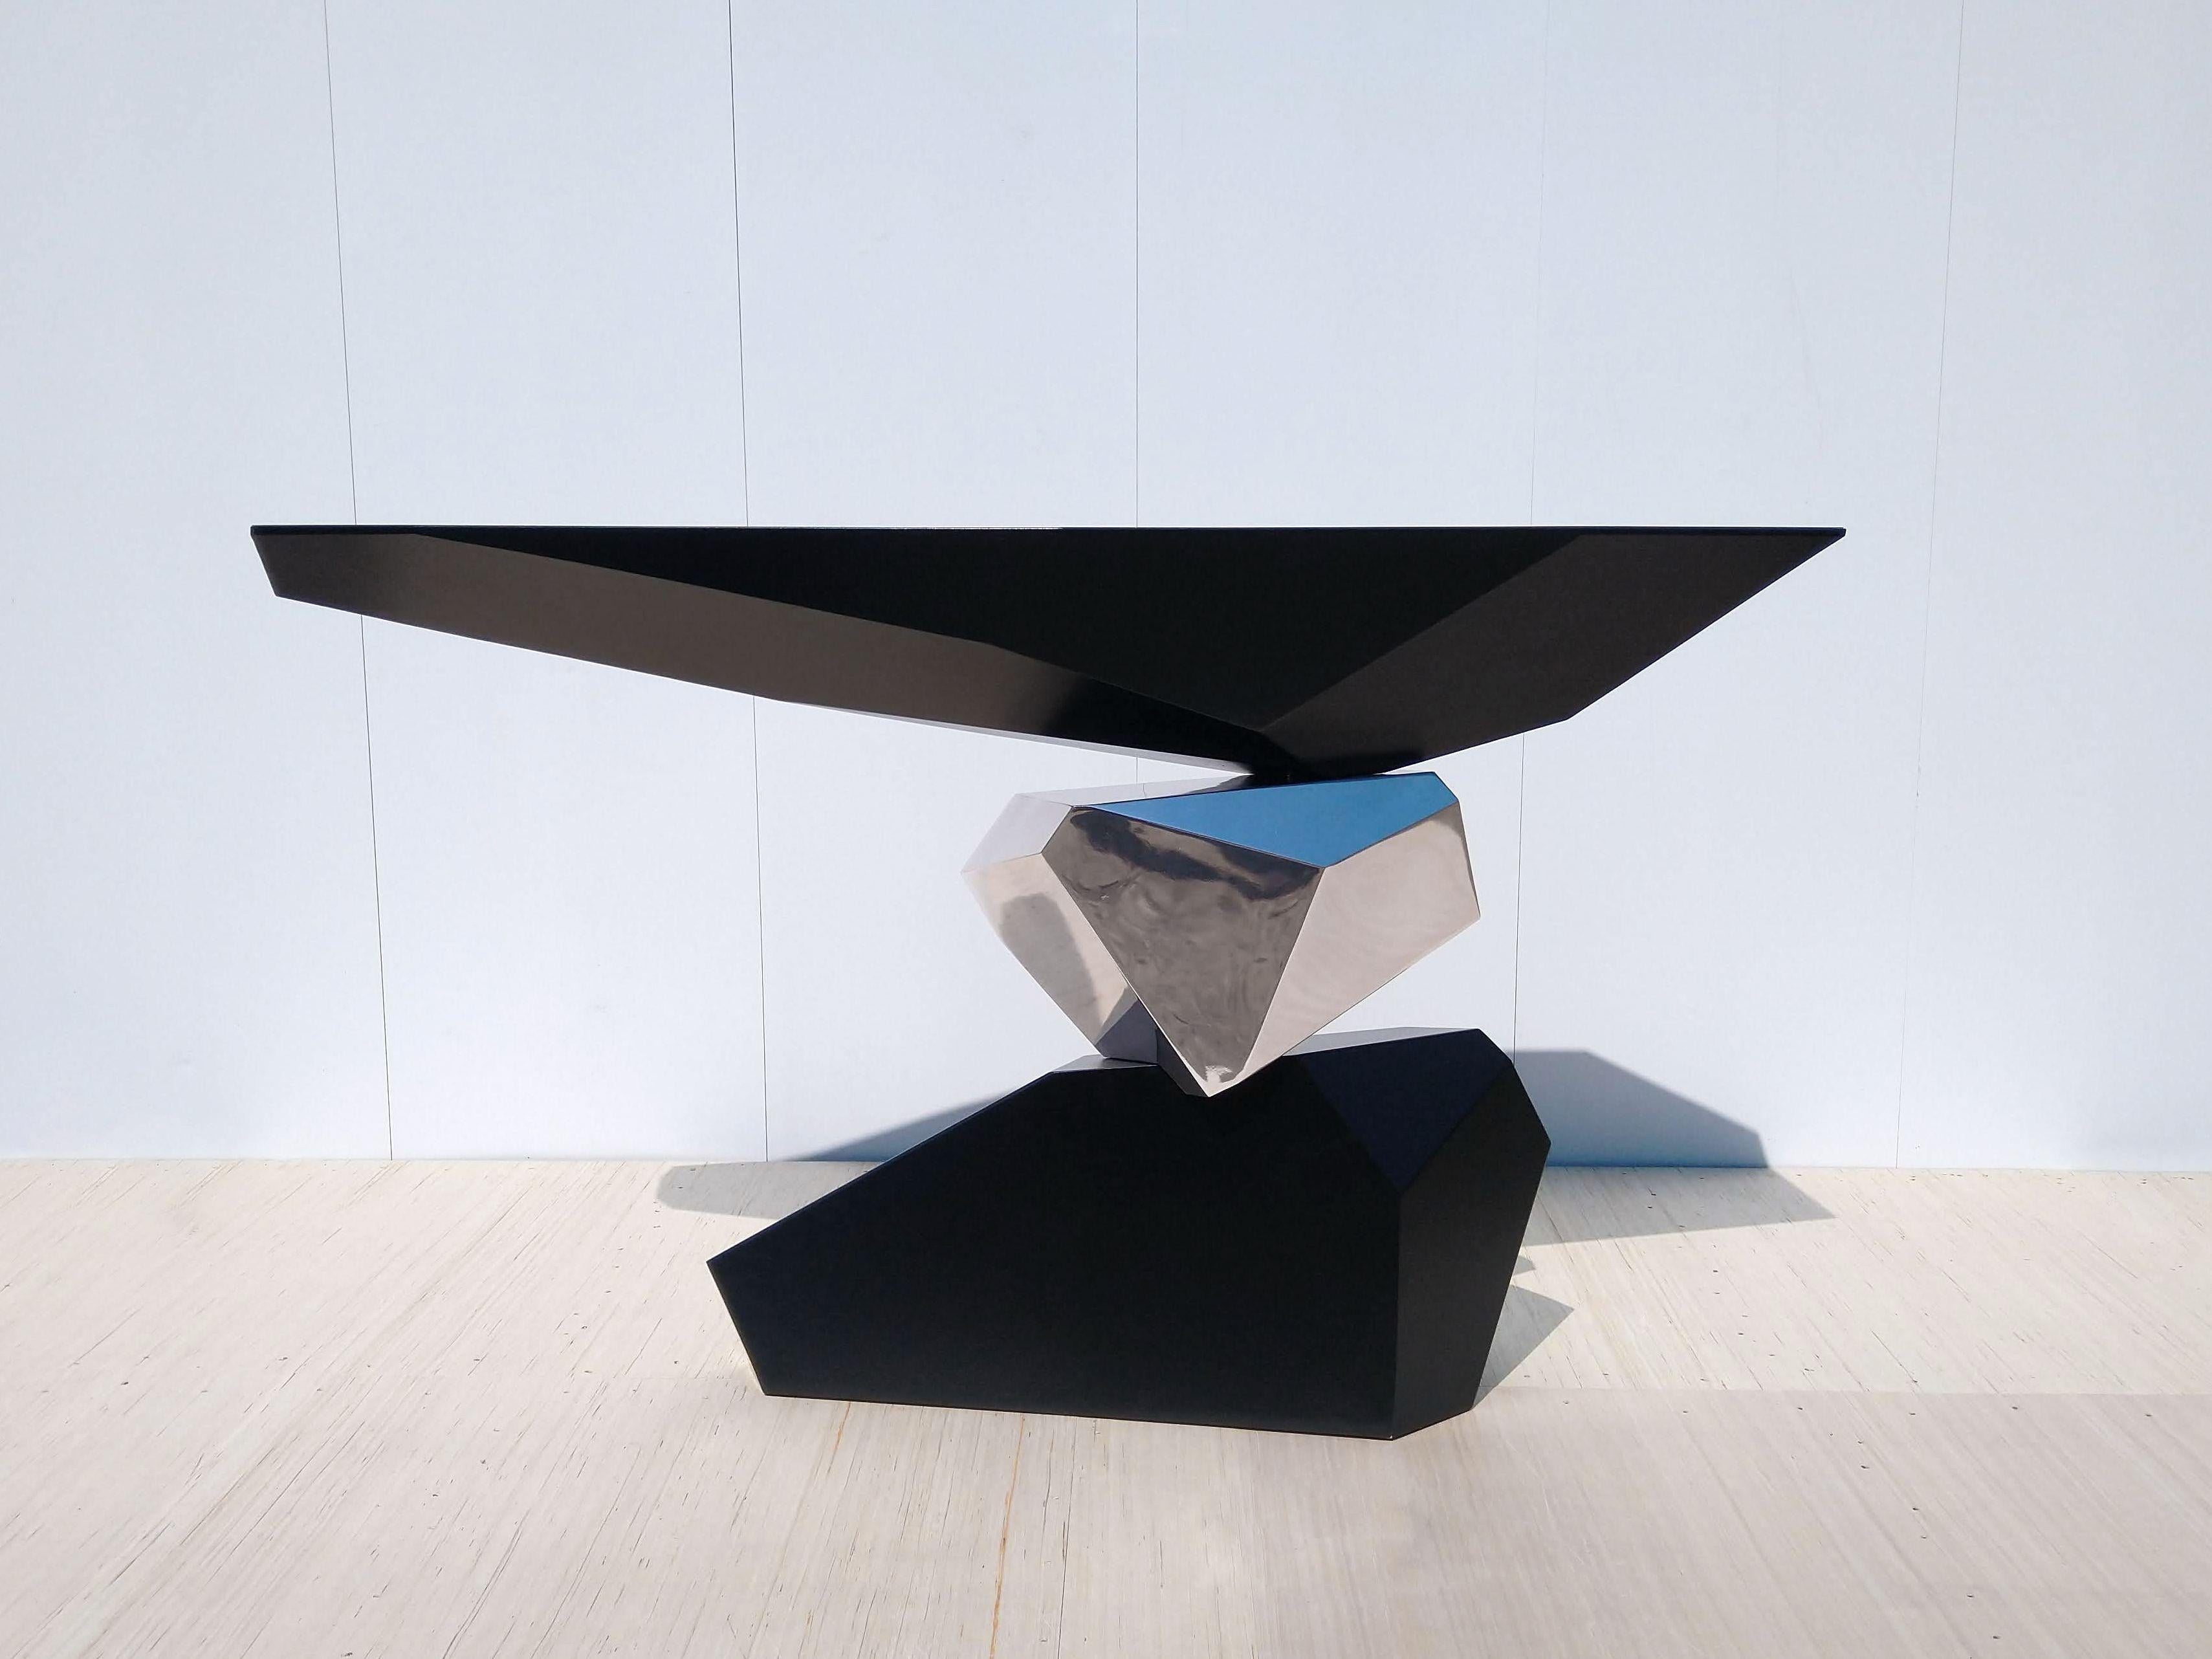 Serenity is a new single-piece console table by Christopher Duffy for Duffy London that appears to defy gravity, toying with visual perspective in a playful three-dimensional trompe l’oeil. An invigorating addition to any hallway, concourse or